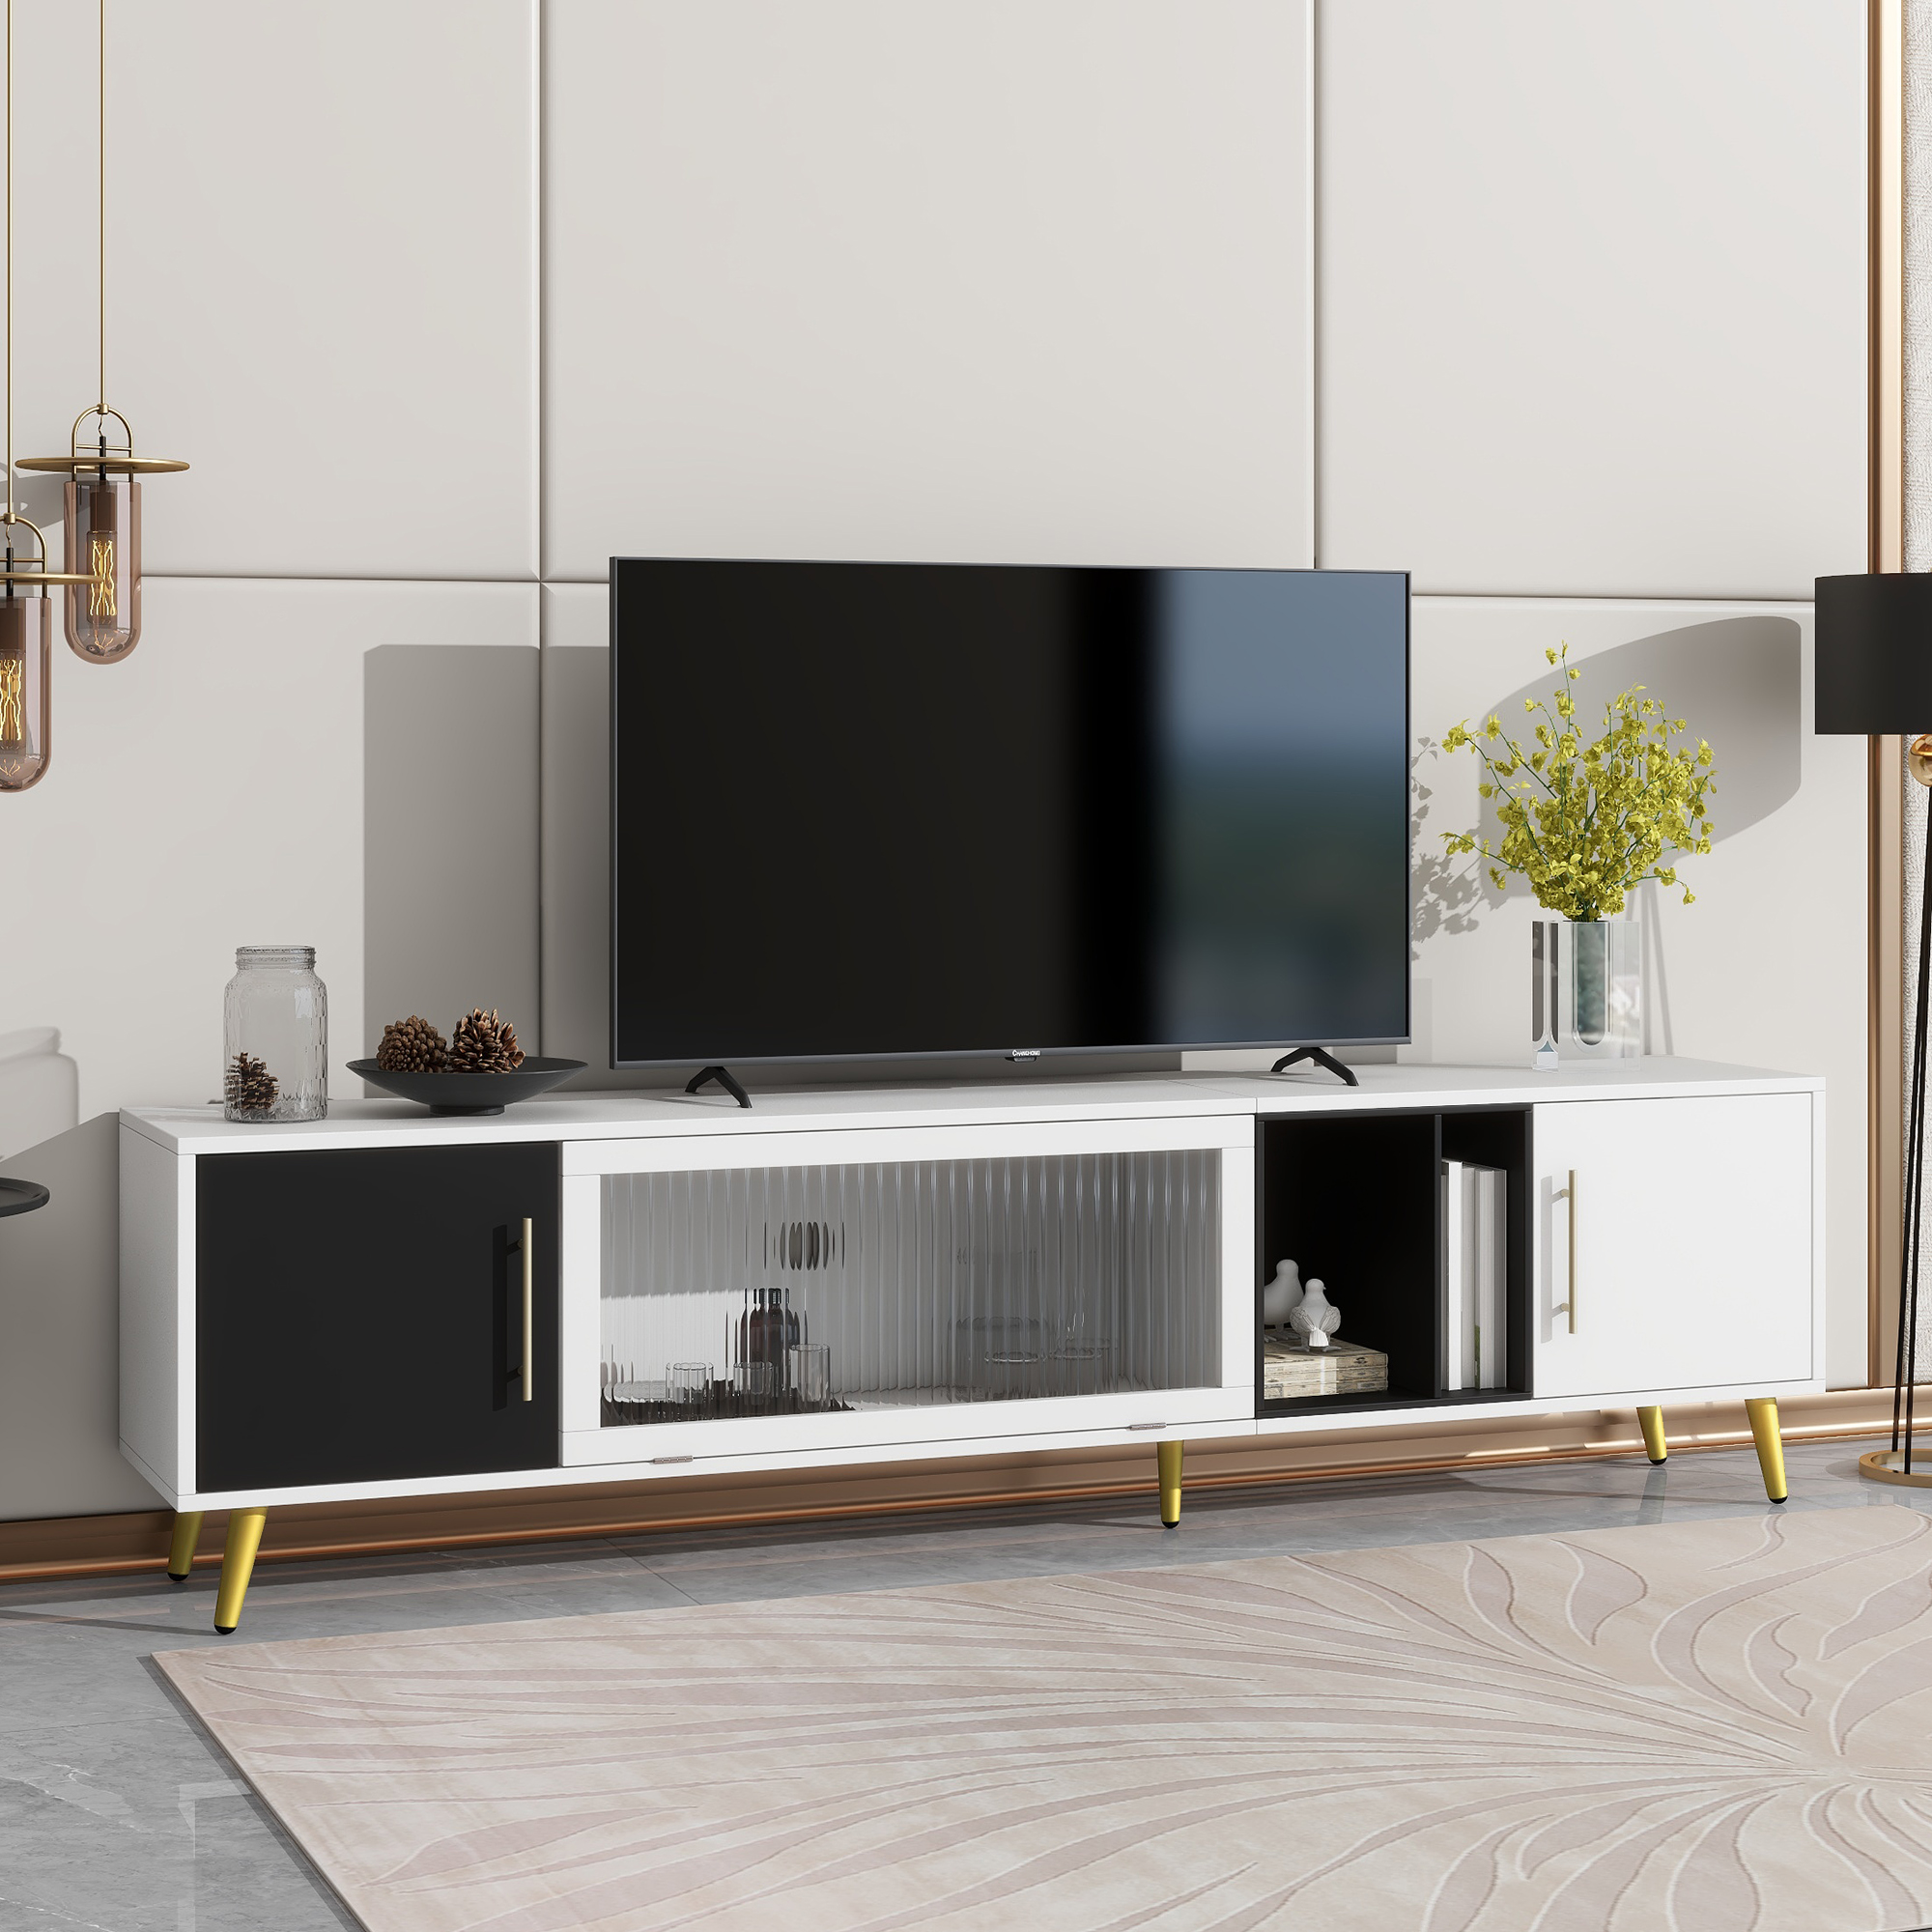 Stylish TV Stand with Golden Metal Handles&Legs - WF307976AAK